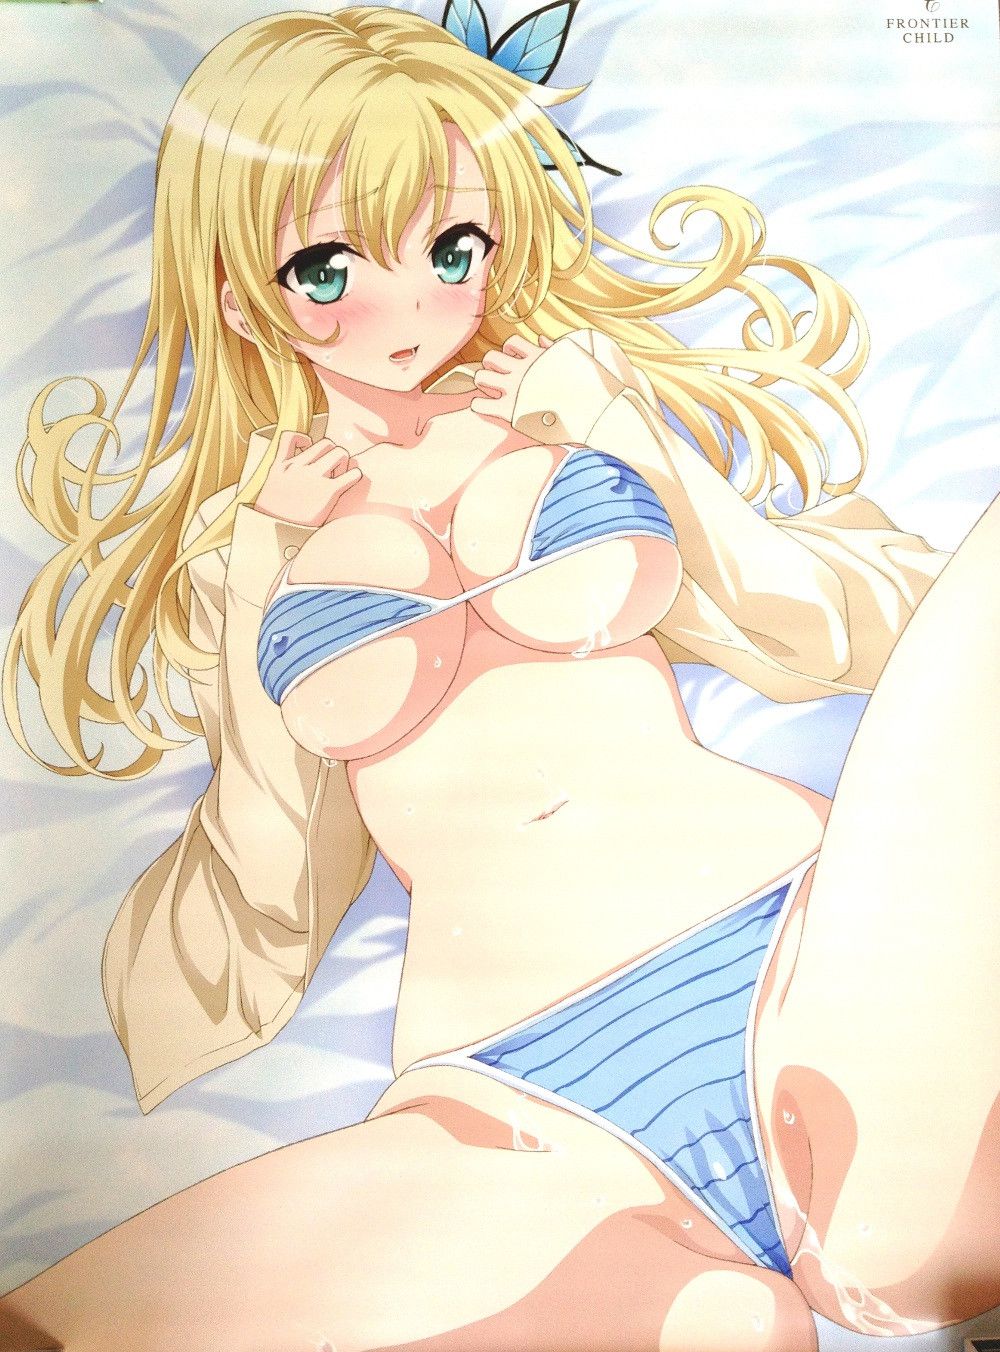 [image] Eroticism character wwwwwwww which was embodied of the sexual desire to be called Hoshina Kashiwazaki of "there are few friends in me" 2